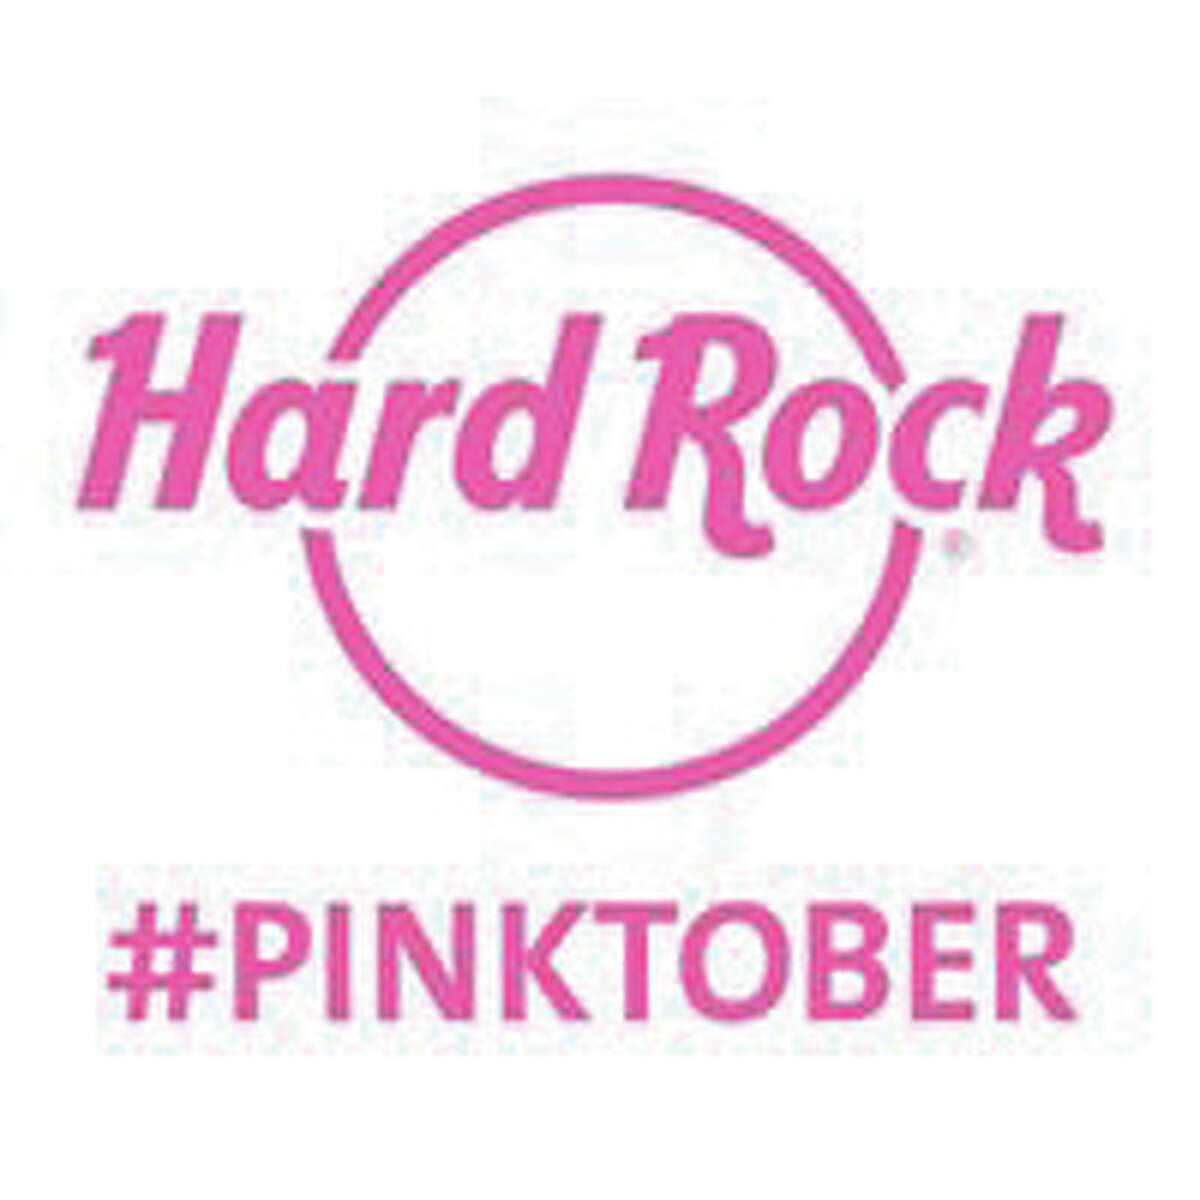 Hard Rock Cafe St. Louis will host their Pinktober Zumba Class and Health Fair Saturday, Oct. 3. Additionally, there will be a silent auction of Hard Rock autographed merchandise, special edition Pinktober items and more